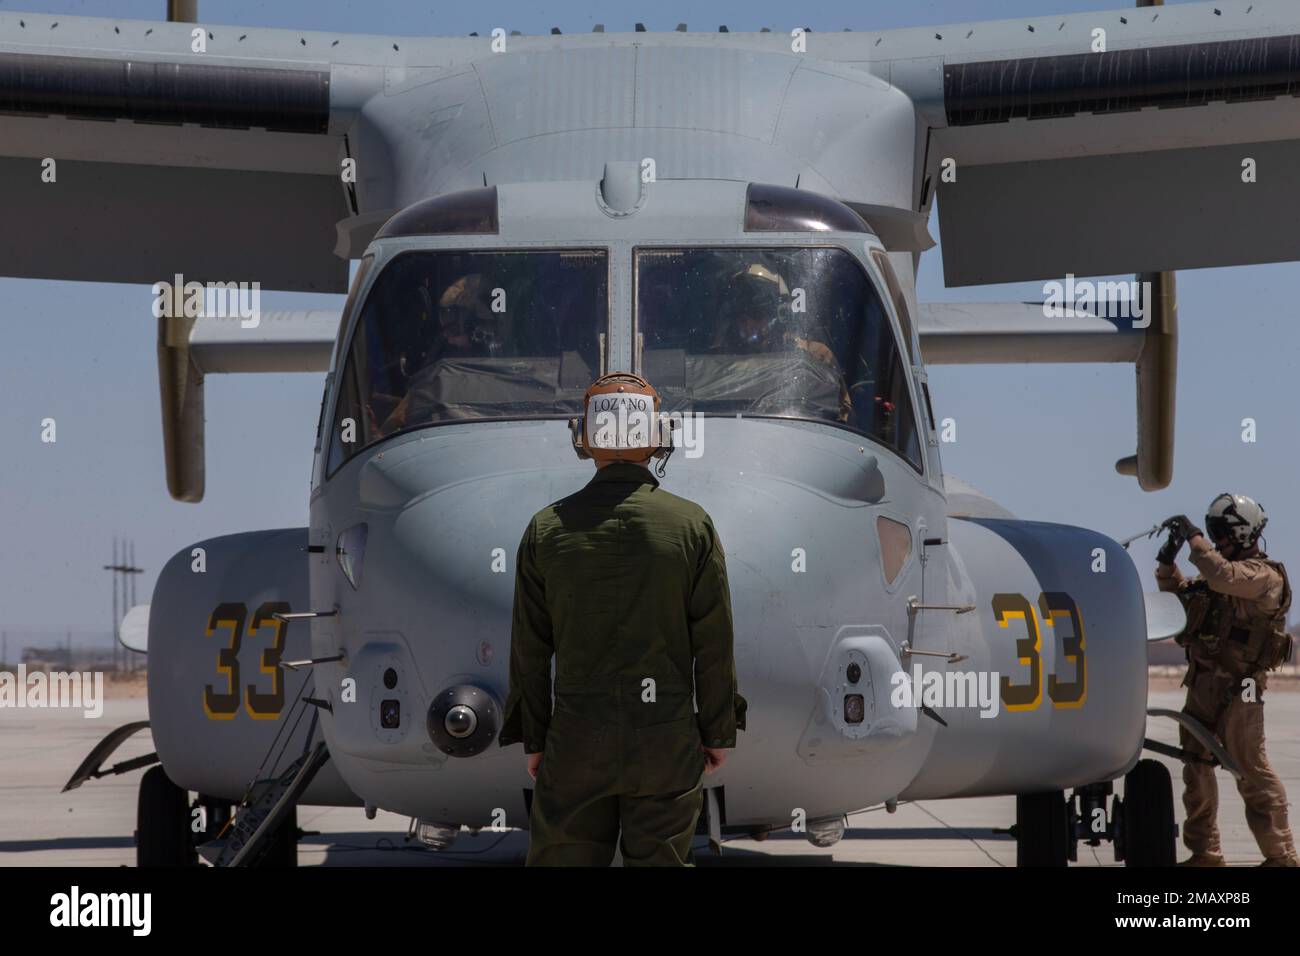 U.S. Marine Corps Lance Cpl. Tyler Torpy, a tiltrotor mechanic with Marine Medium Tiltrotor Squadron (VMM) 362 (Reinforced), 13th Marine Expeditionary Unit, prepares to guide a MV-22B Osprey during Realistic Urban Training exercise at Marine Corps Air Station Yuma, Arizona, June 7, 2022. The purpose of RUT is to enhance the integration and collective capability of the MEU's command air, ground and logistics elements and prepare the 13th MEU to meet the nation's crisis response needs during its upcoming overseas deployment. Stock Photo